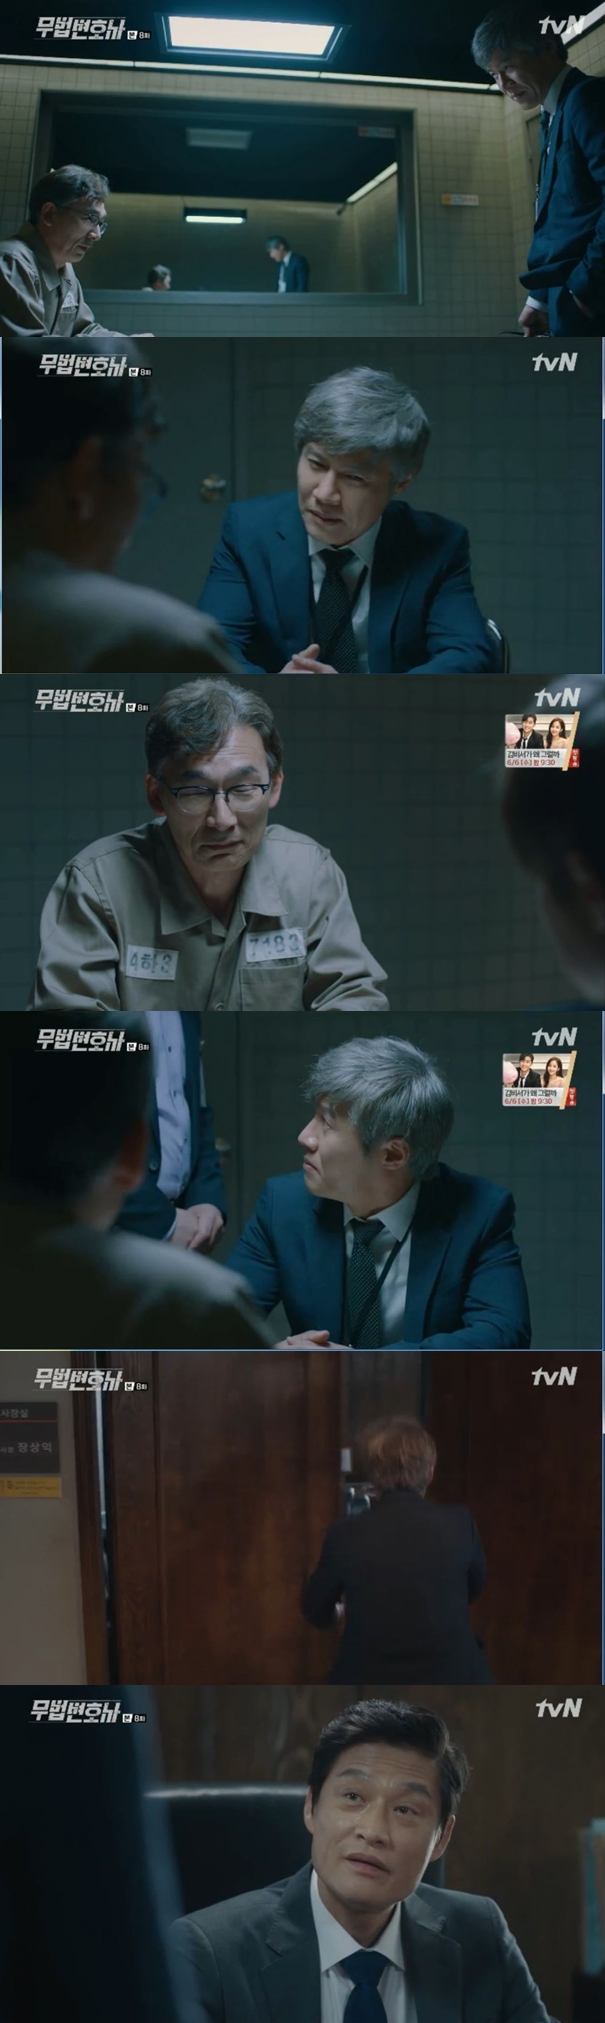 An Oo-ju (Choi Min-soo) has penalized World Bank chapters for him by blackmail – Cinémix Par Chloé.On TVN Lawless Lawyer broadcasted at 9:10 pm on the 3rd, Anoju was seen leaving Danger.Bong Sang-pil (Lee Joon-gi) leaked information about the relationship between Son Sung-sik and An-ohju to prosecutor Park Ho-san.Anoju, who was in Danger, met Son Sung-sik, who was imprisoned, and made him Blackmail – Cinémix Par Chloé for his daughter.It may be The Bodyguard that we planted in your daughter, or it may be the main culprit of the assault, it depends on you, Anoju threatened him.Son Sung-sik was furious when he saw his daughter, but he followed him.Son Sung-sik confessed to Chun Seung-bum, who came to cover him, I did everything.Chun Seung-beom was angry, but Son Sung-sik had decided to take all the sins for his daughter. Chun Seung-beom met Bong Sang-pil without knowing anything from Son Sung-sik.Bong Sang-pil said, I have passed a huge one, but I should not finish it like this.